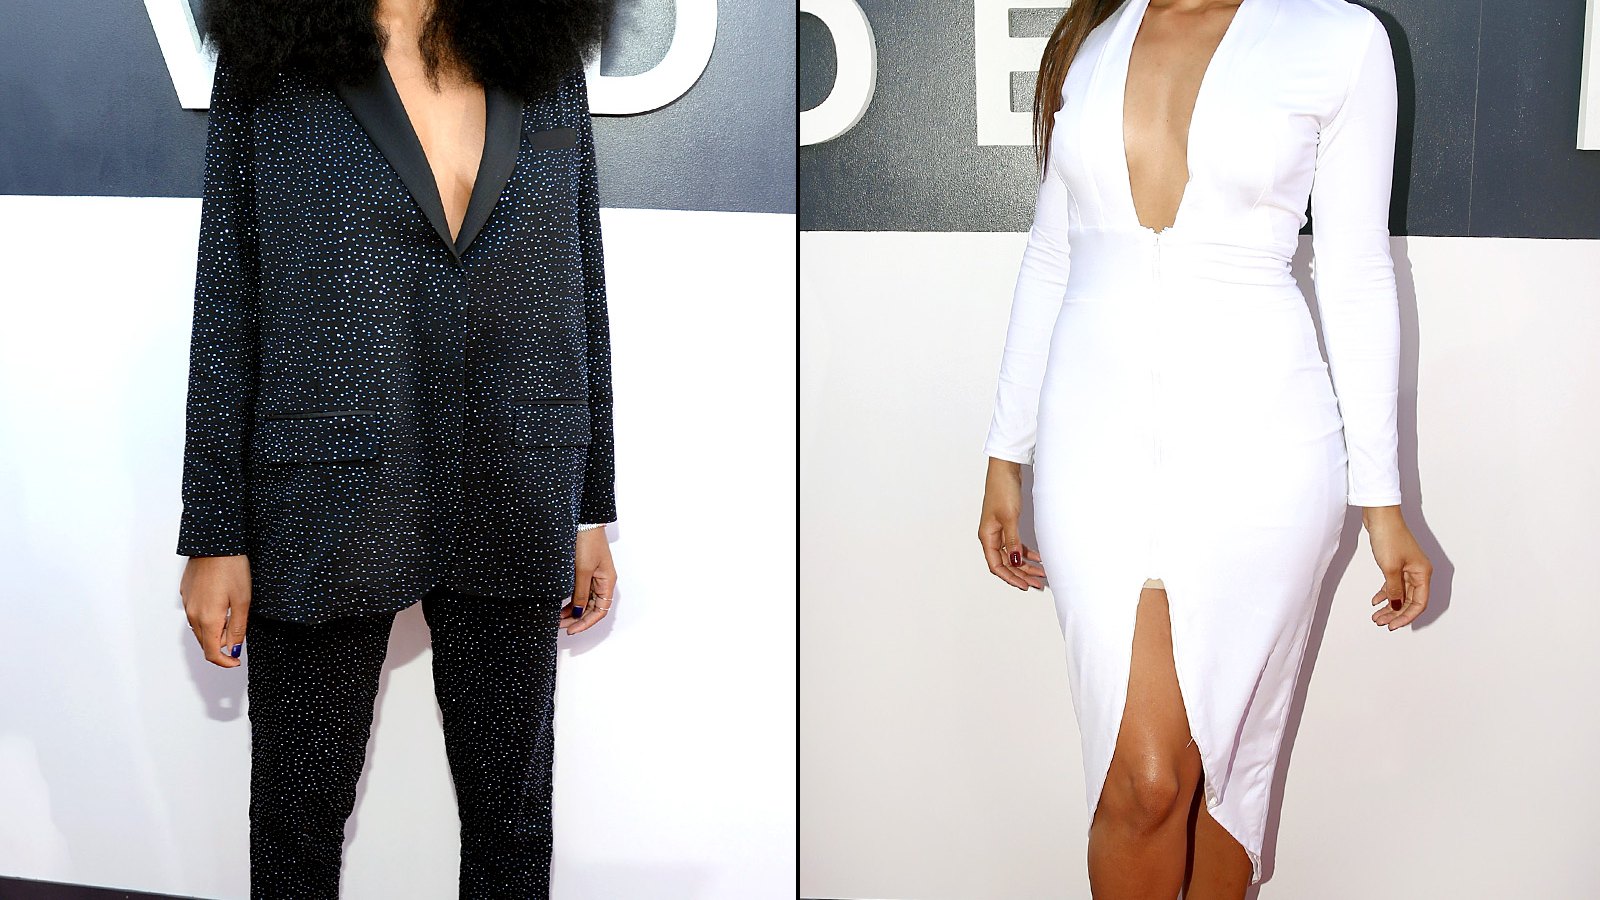 Solange Knowles, Jordin Sparks at the 2014 MTV VMAs on August 24